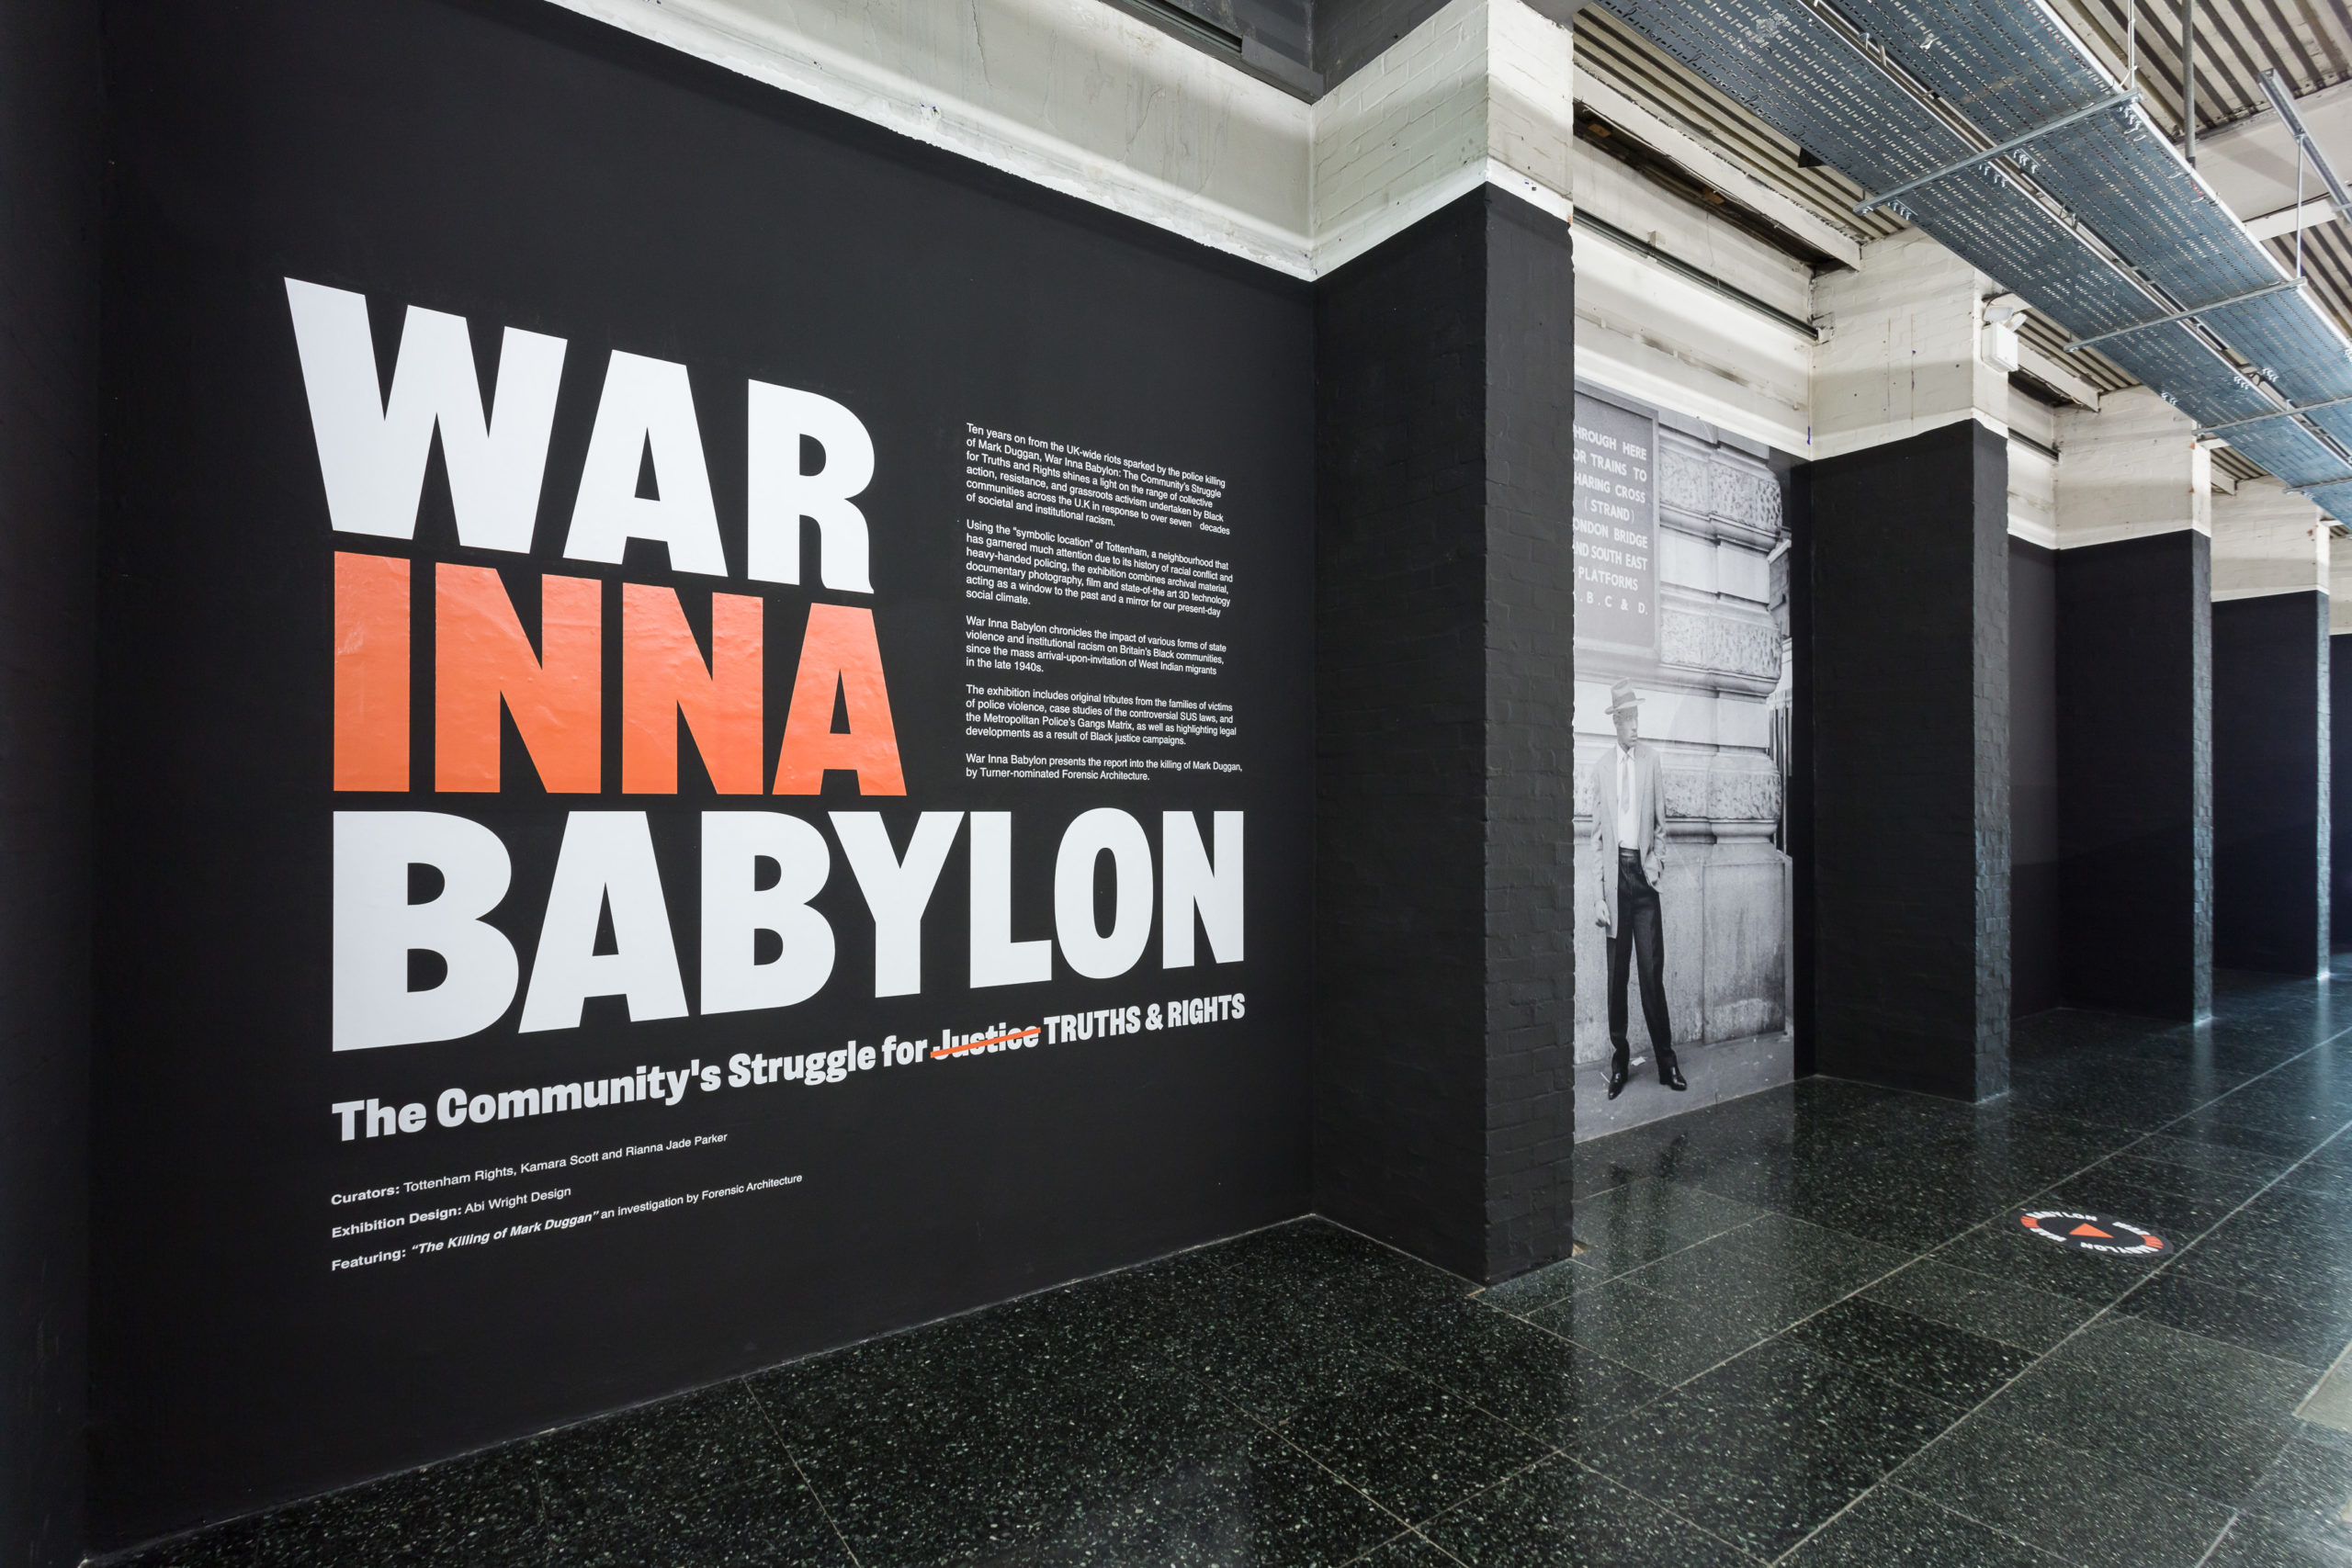 A black wall with the title of the exhibition.